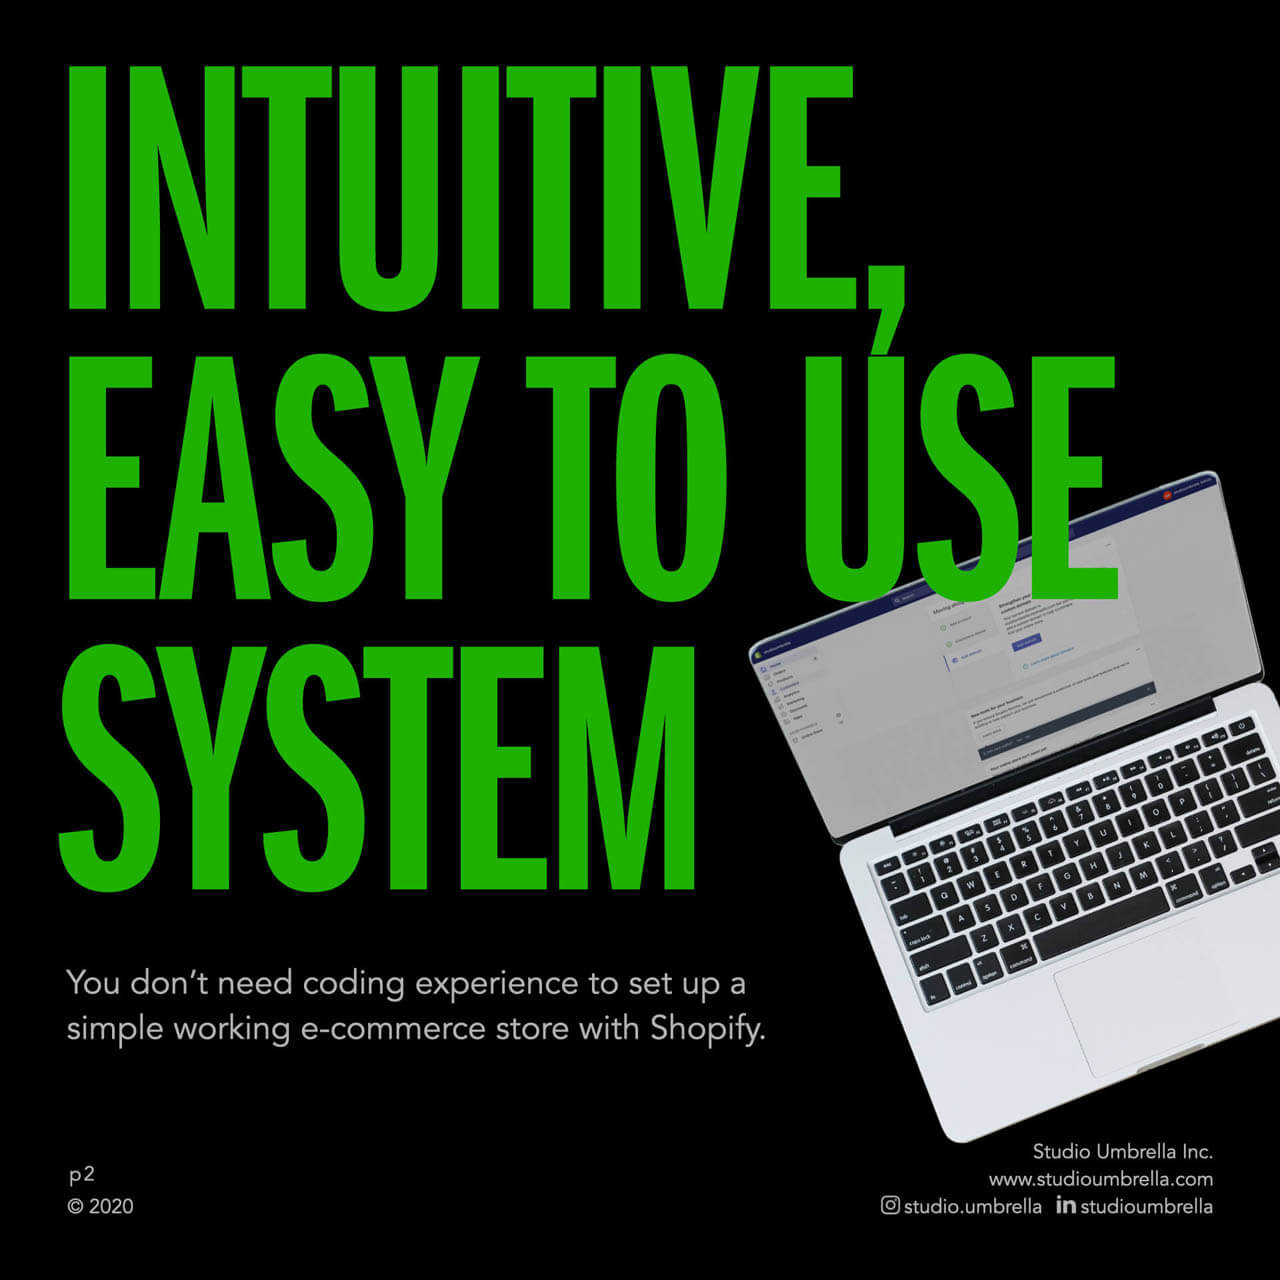 Intuitive, easy to use system